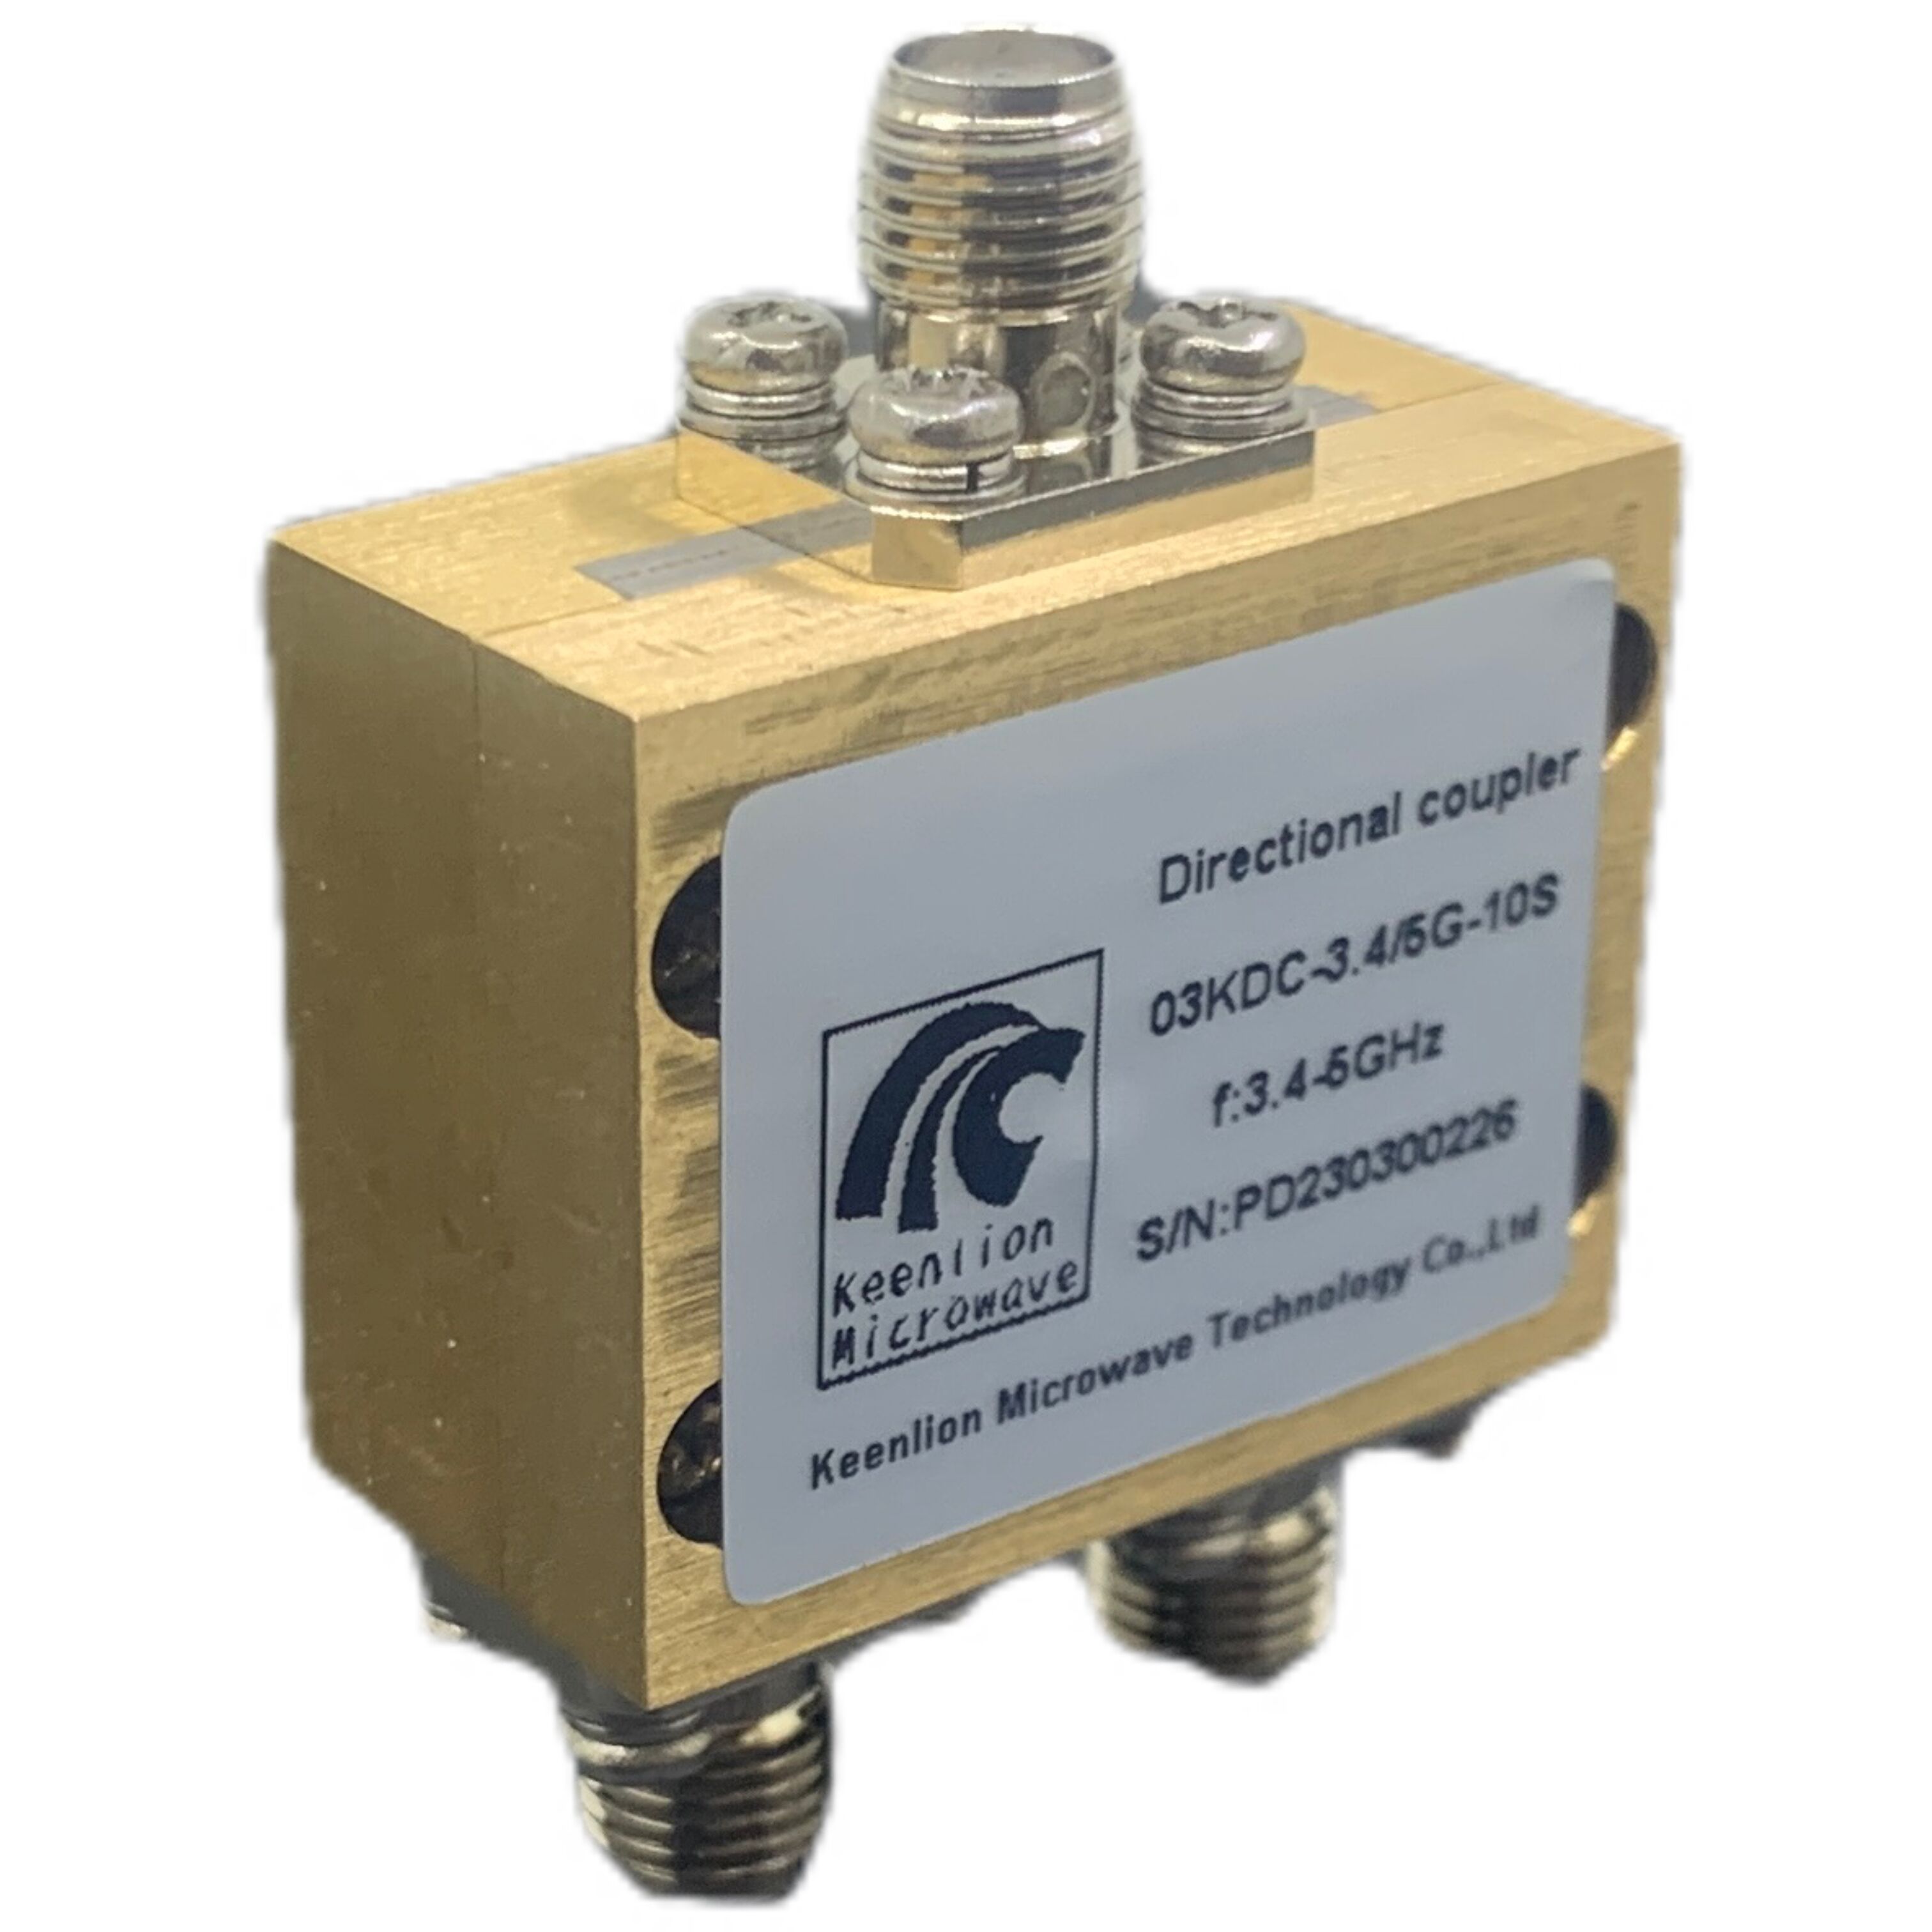 10W Directional Coupler 3400-5000MHz Microuwave Low VSWR High Isolation Directional Coupler SMA Directional Coupler Featured Image